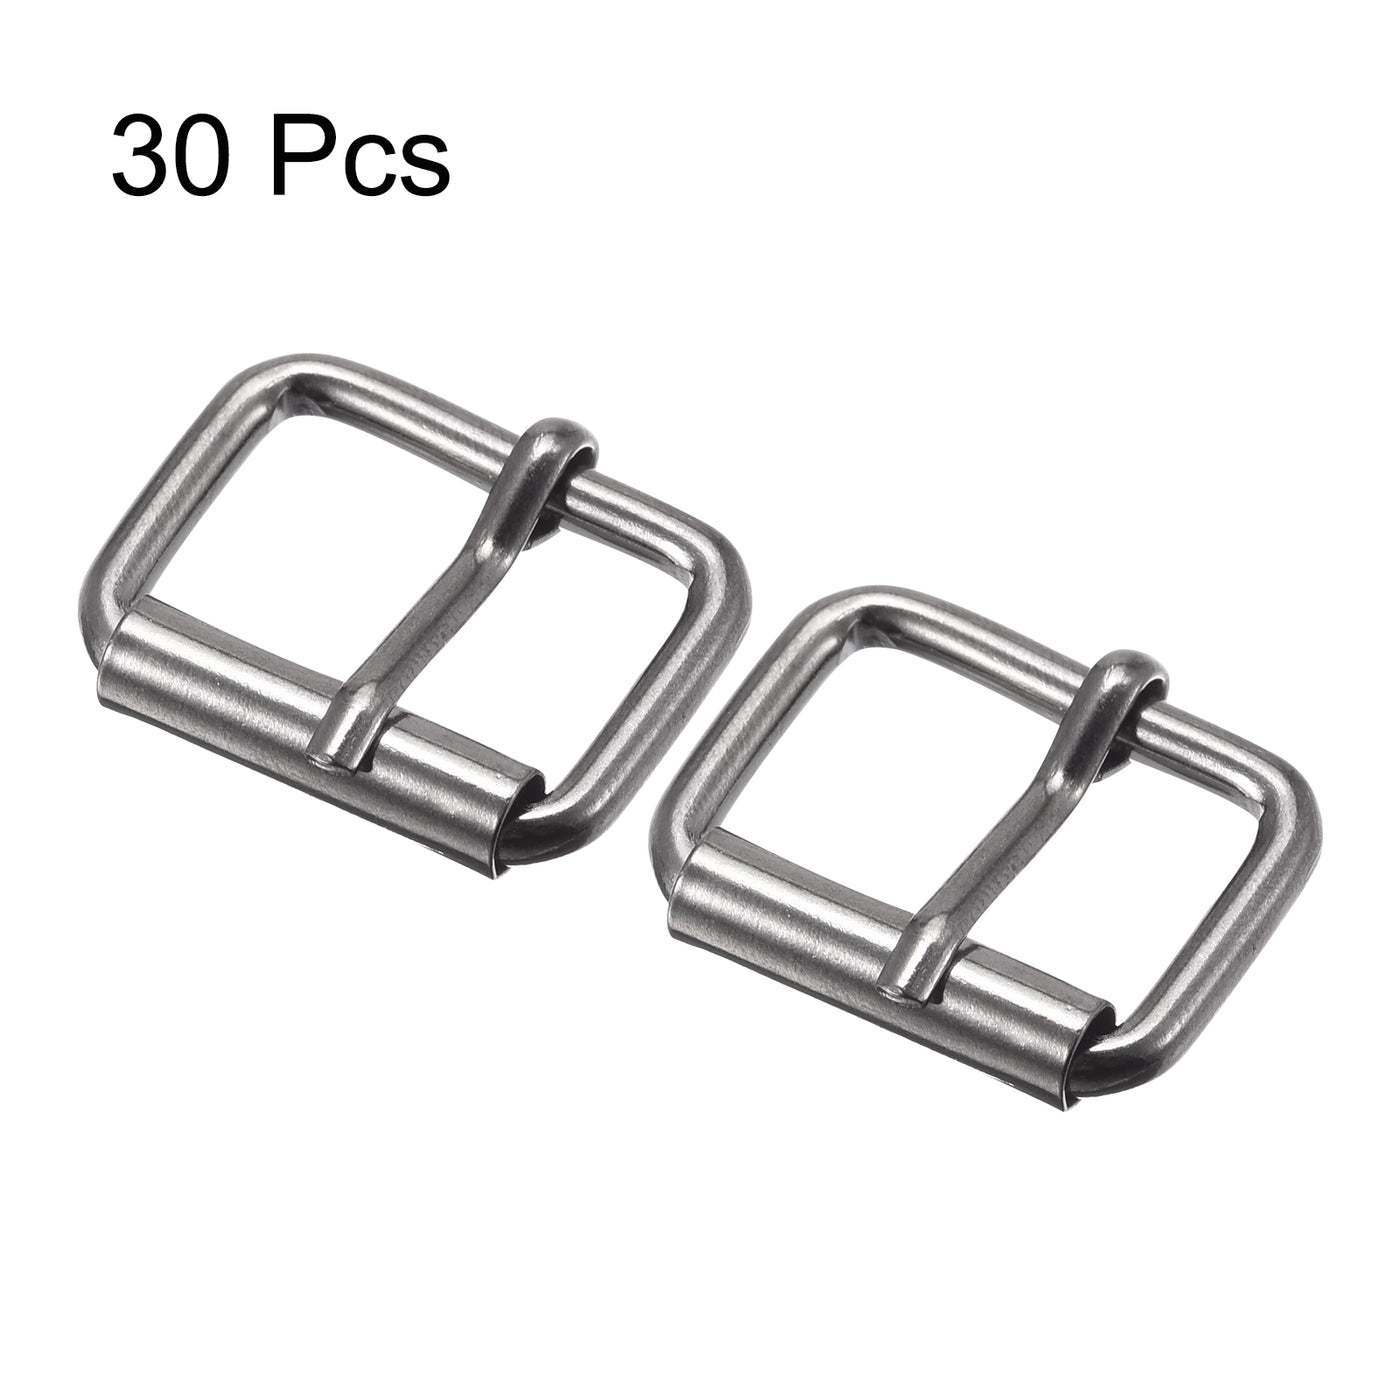 uxcell Uxcell 20mm(0.79") Metal Roller Buckles for Belts Bags Straps DIY Dark Gray 30pcs